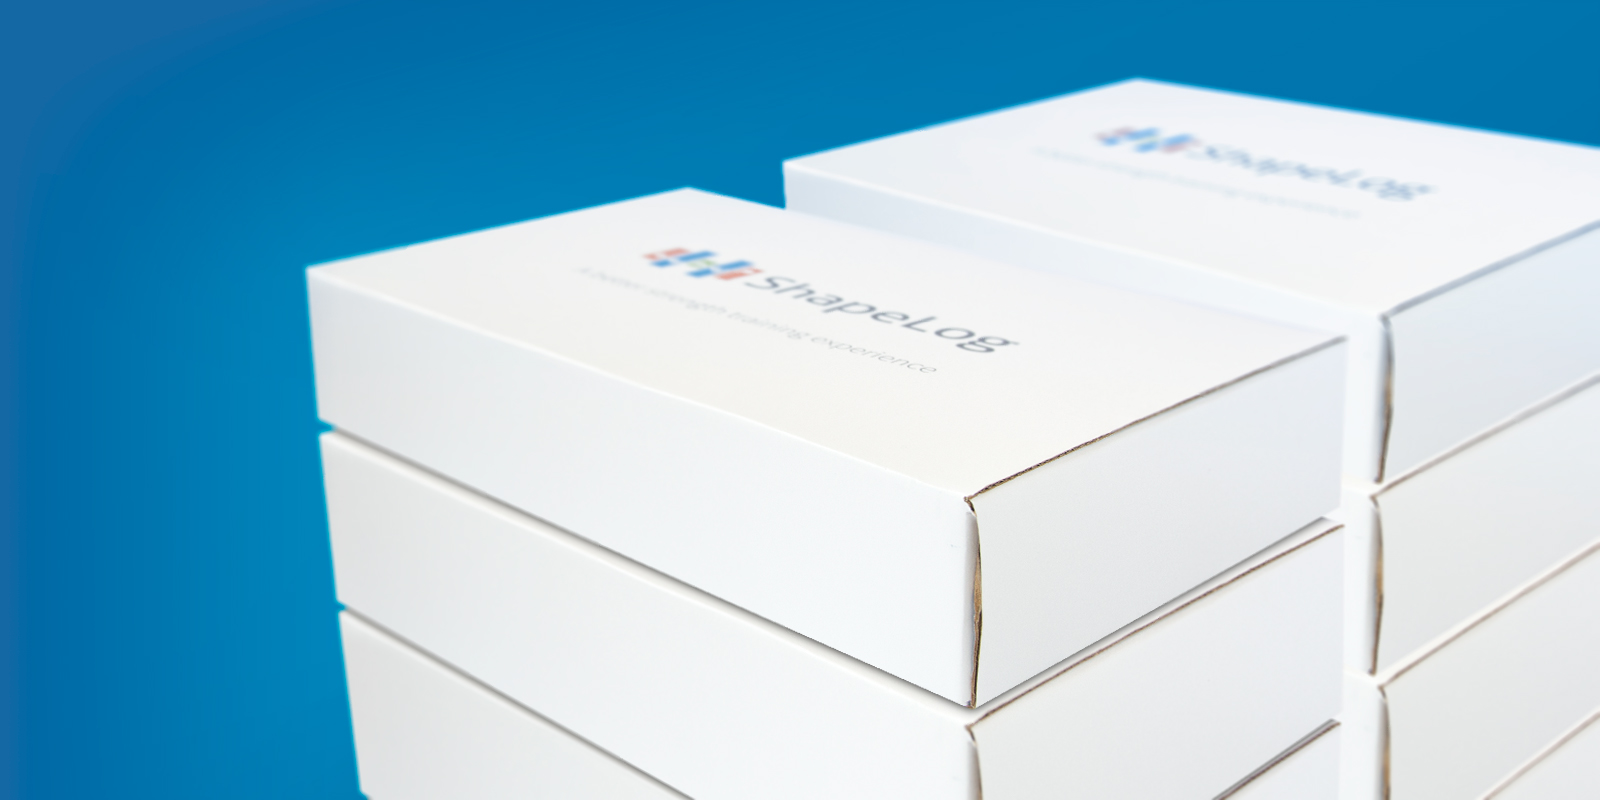 ShapeLog premium mailer stack by Blue Flame Thinking